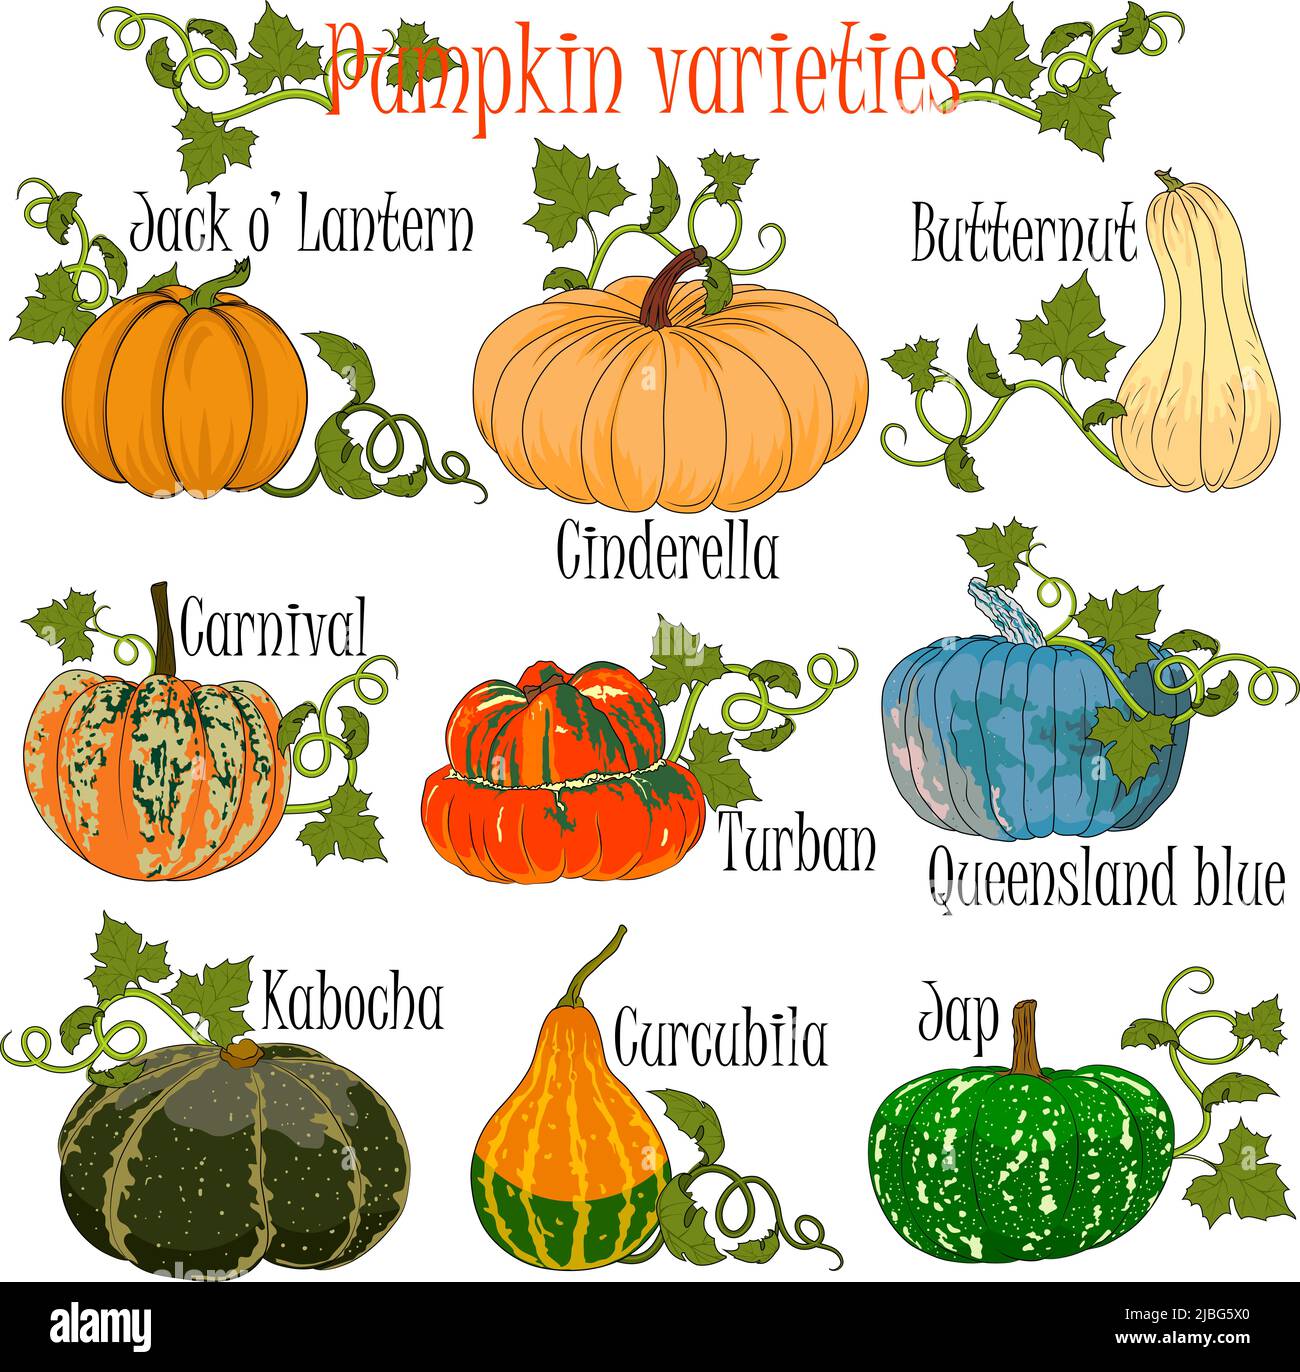 Pumpkin varieties performed in a colorful hand drawn format for illustrations at agricultural fairs in preparation for Halloween. Vector illustration. Stock Photo